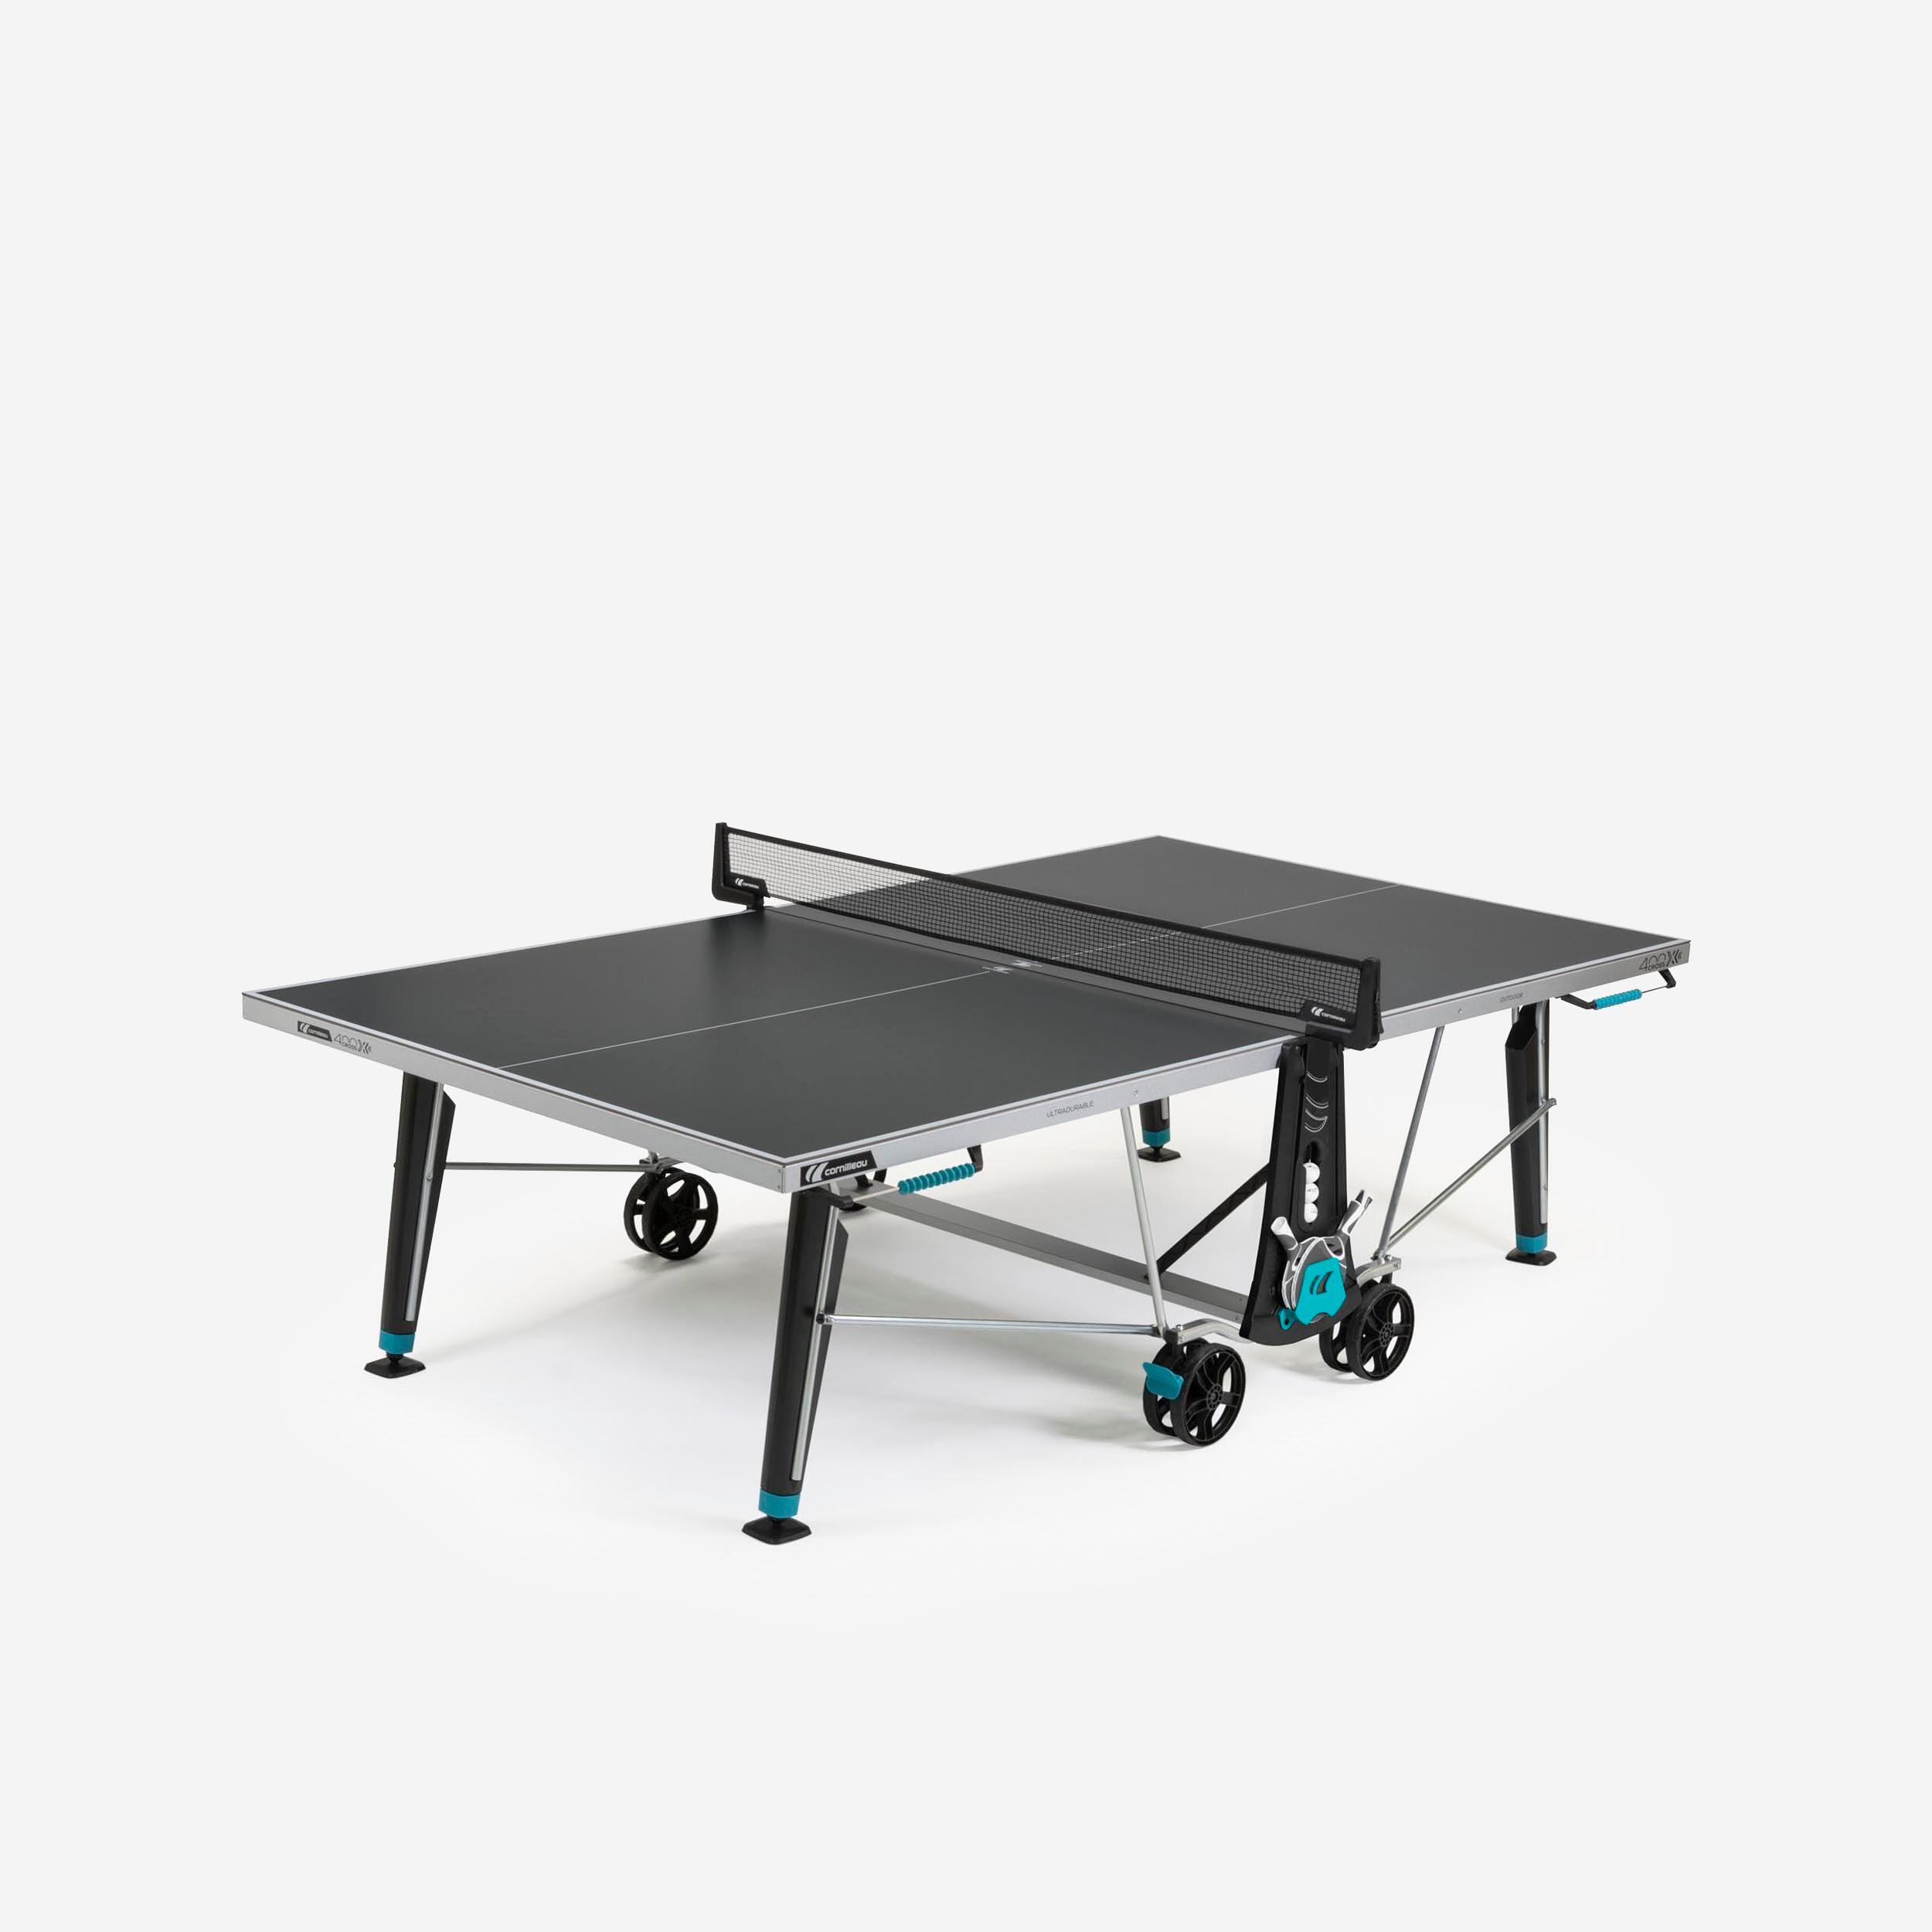 LLJ&OO 5/8 Inch Professional Ping Pong Table Tennis Table,Foldable with Free Rackets Balls and Net 